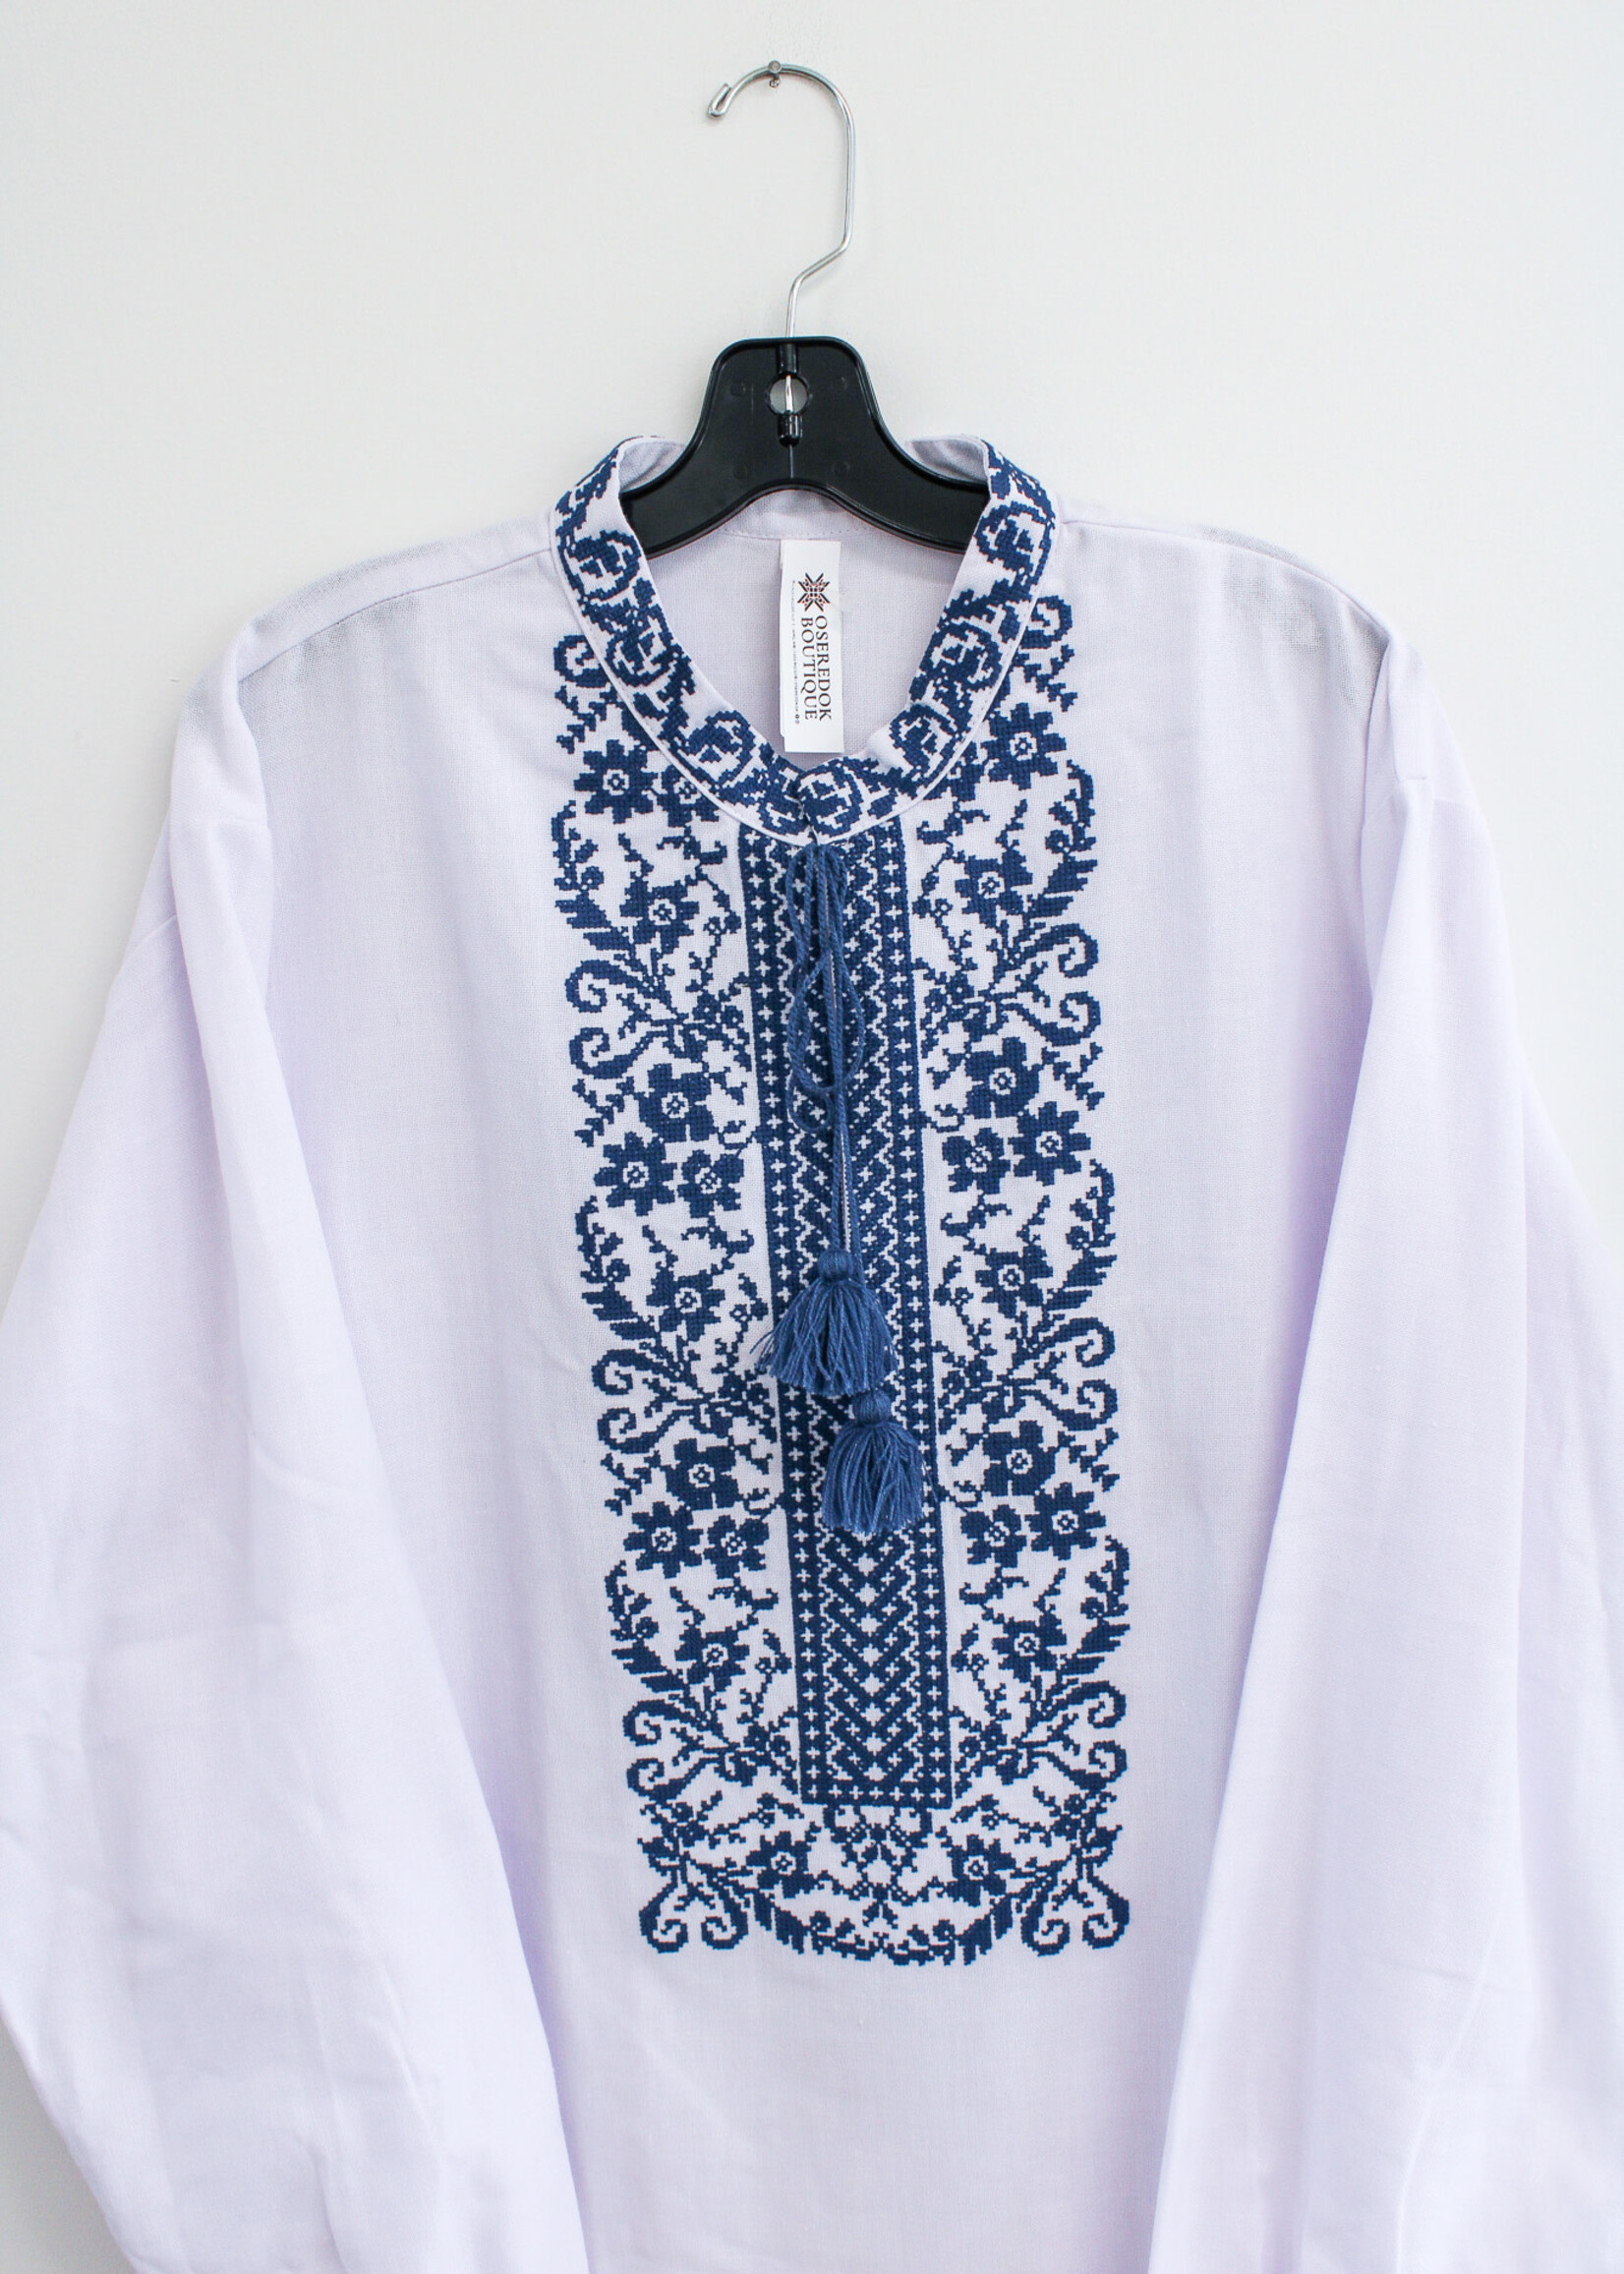 APPAREL - Vyshyvanka (M) - White (Size58), with Blue floral embroidery